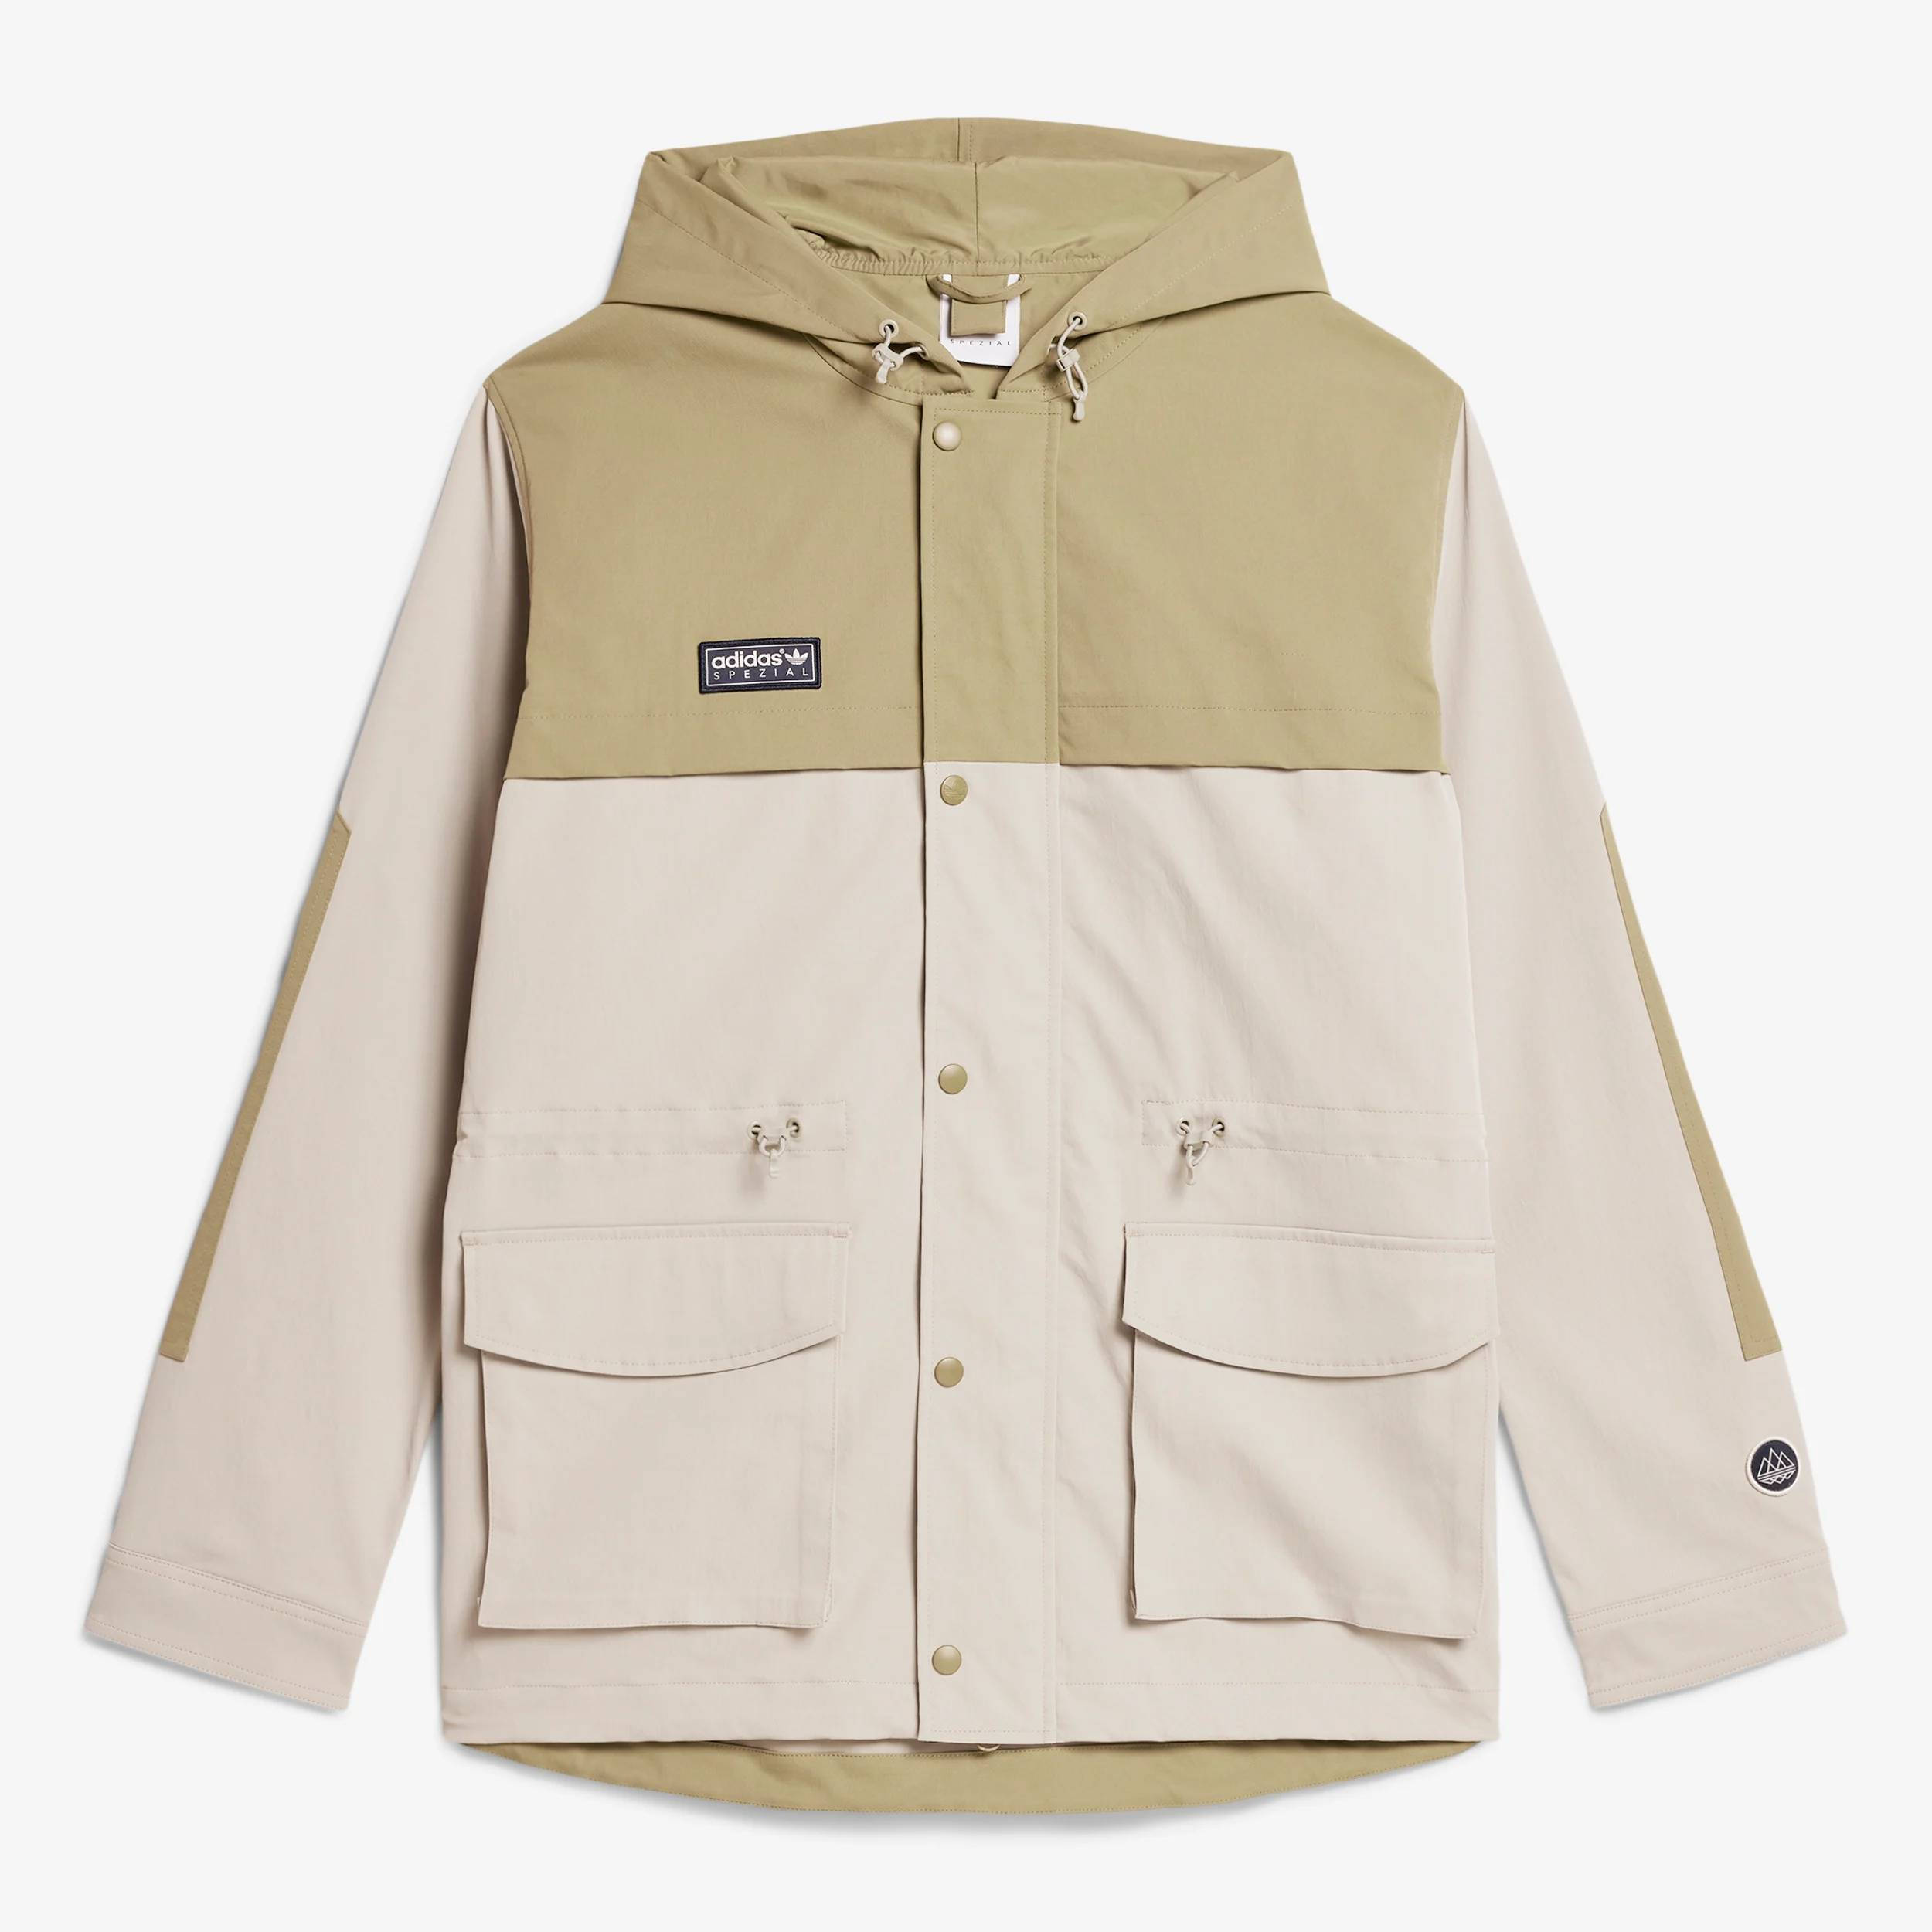 adidas Spezial Moorfield Jacket | Where To Buy | IN6753 | The Sole ...